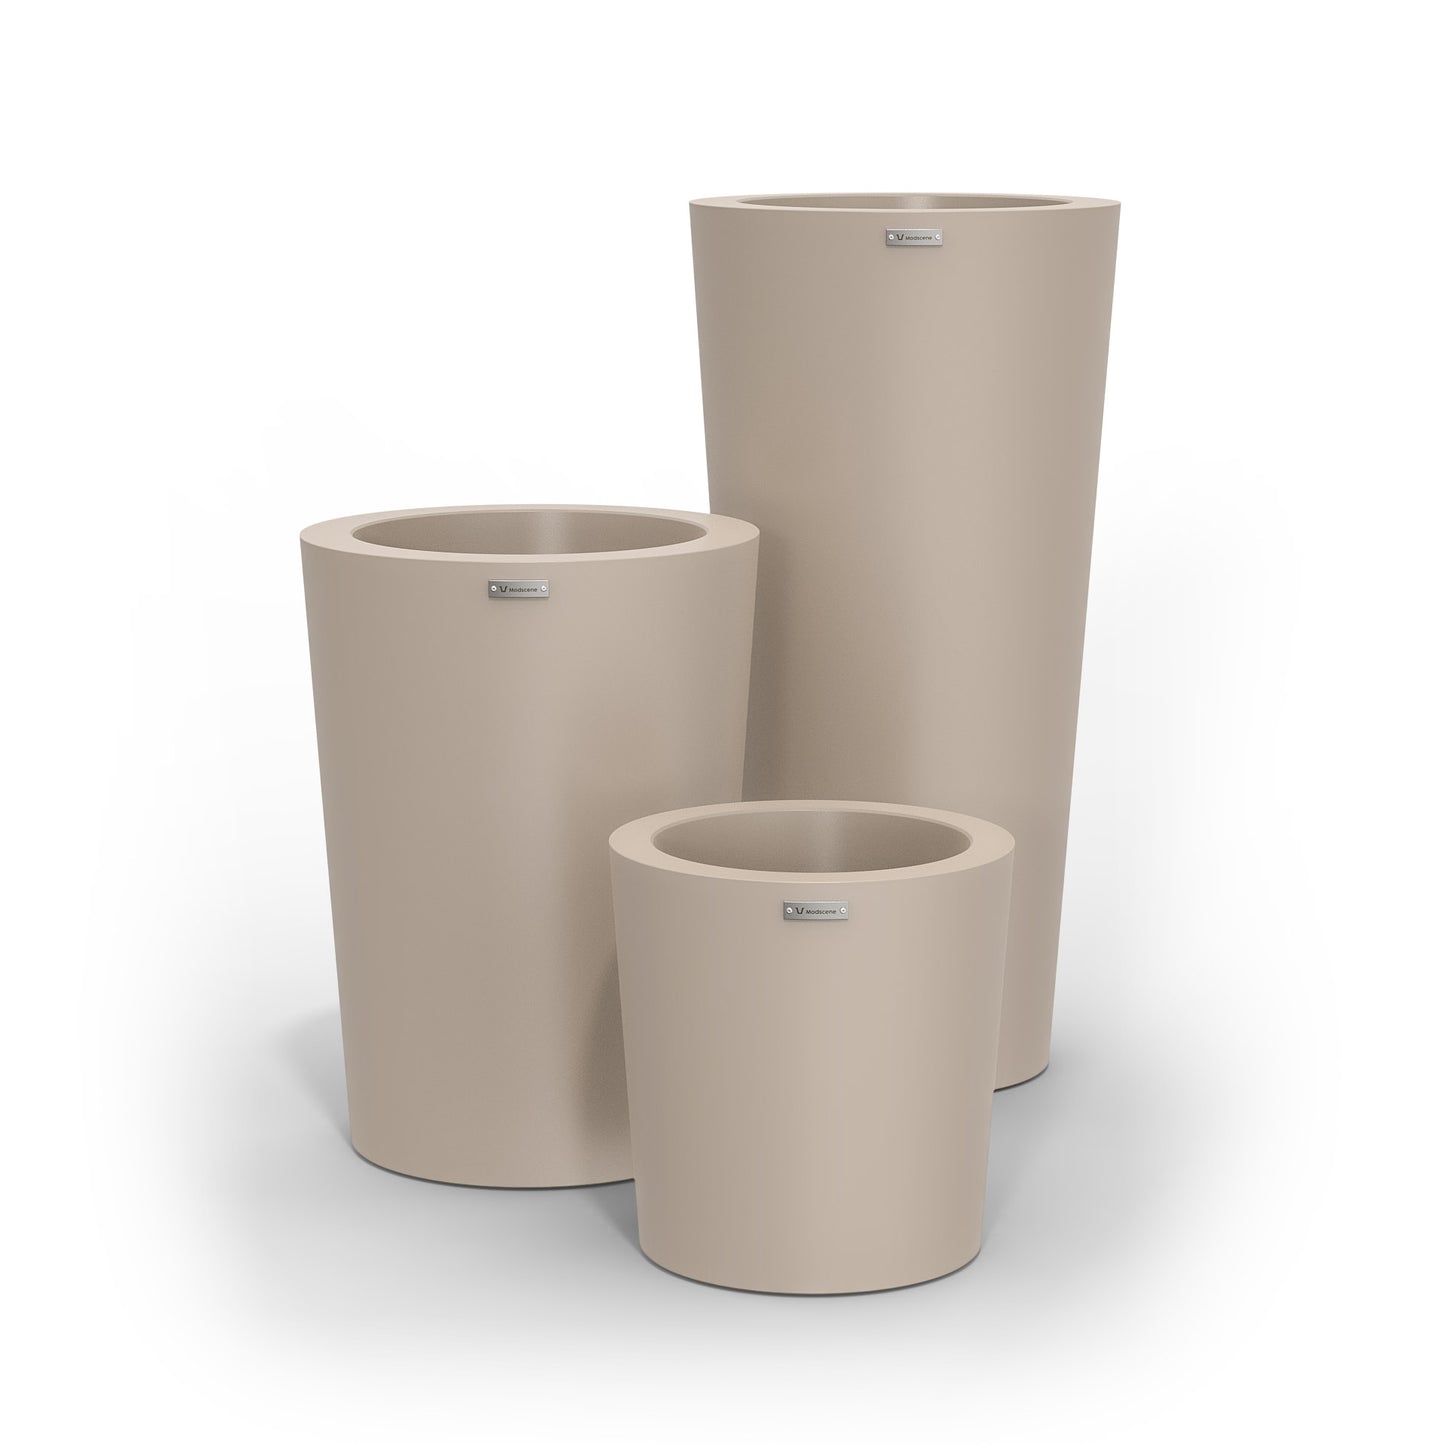 A cluster of three Modscene planter pots in a sand stone colour.